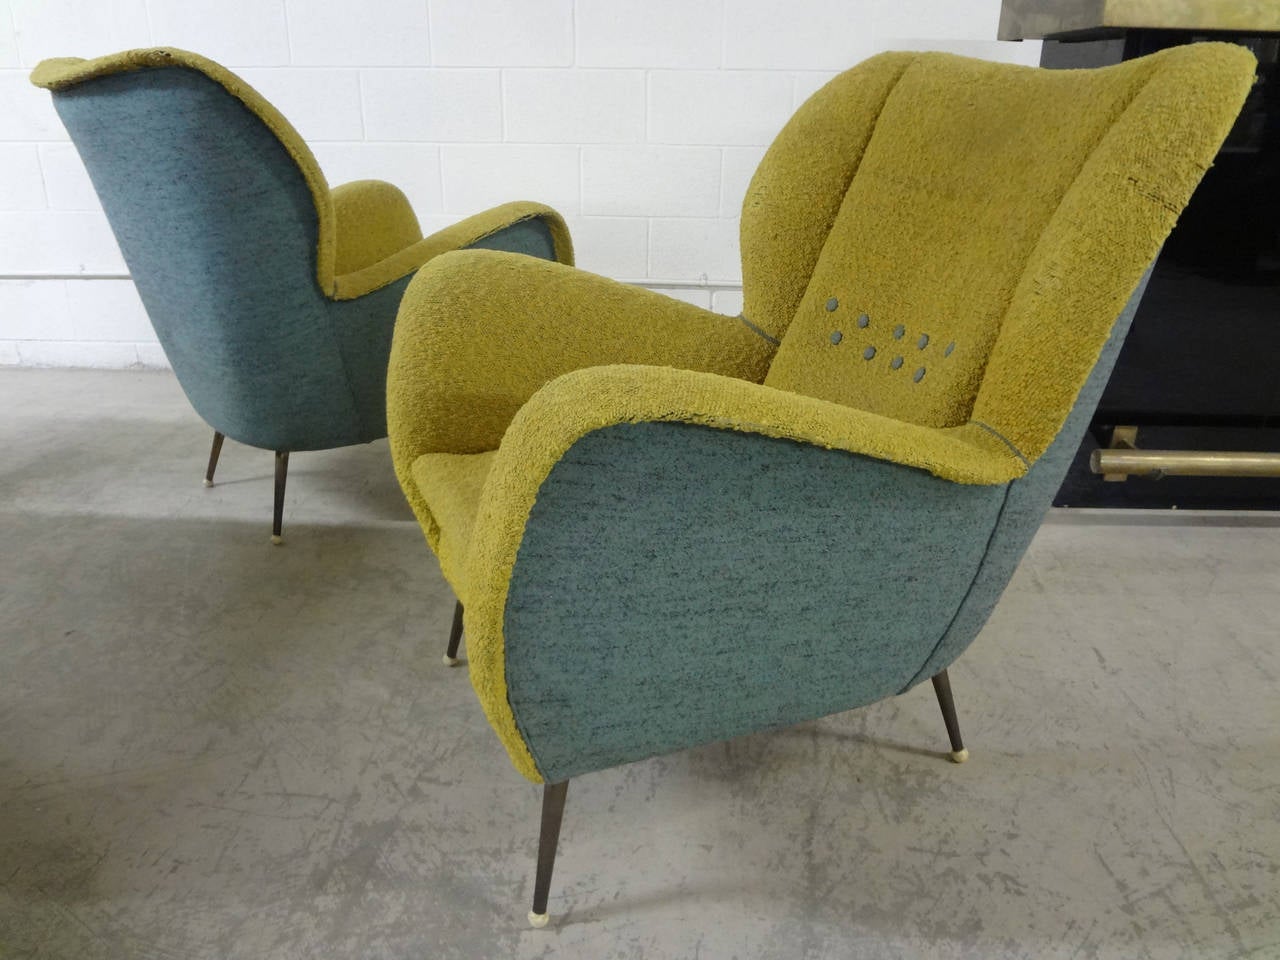 Stunning and sculptural, this pair of italian chairs, circa 1950's is the epitome of italian design. Brass tapered legs with white ball tips, dual color upholstery in italian wool boucle, and amazing comfort to boot! Chairs sport original upholstery